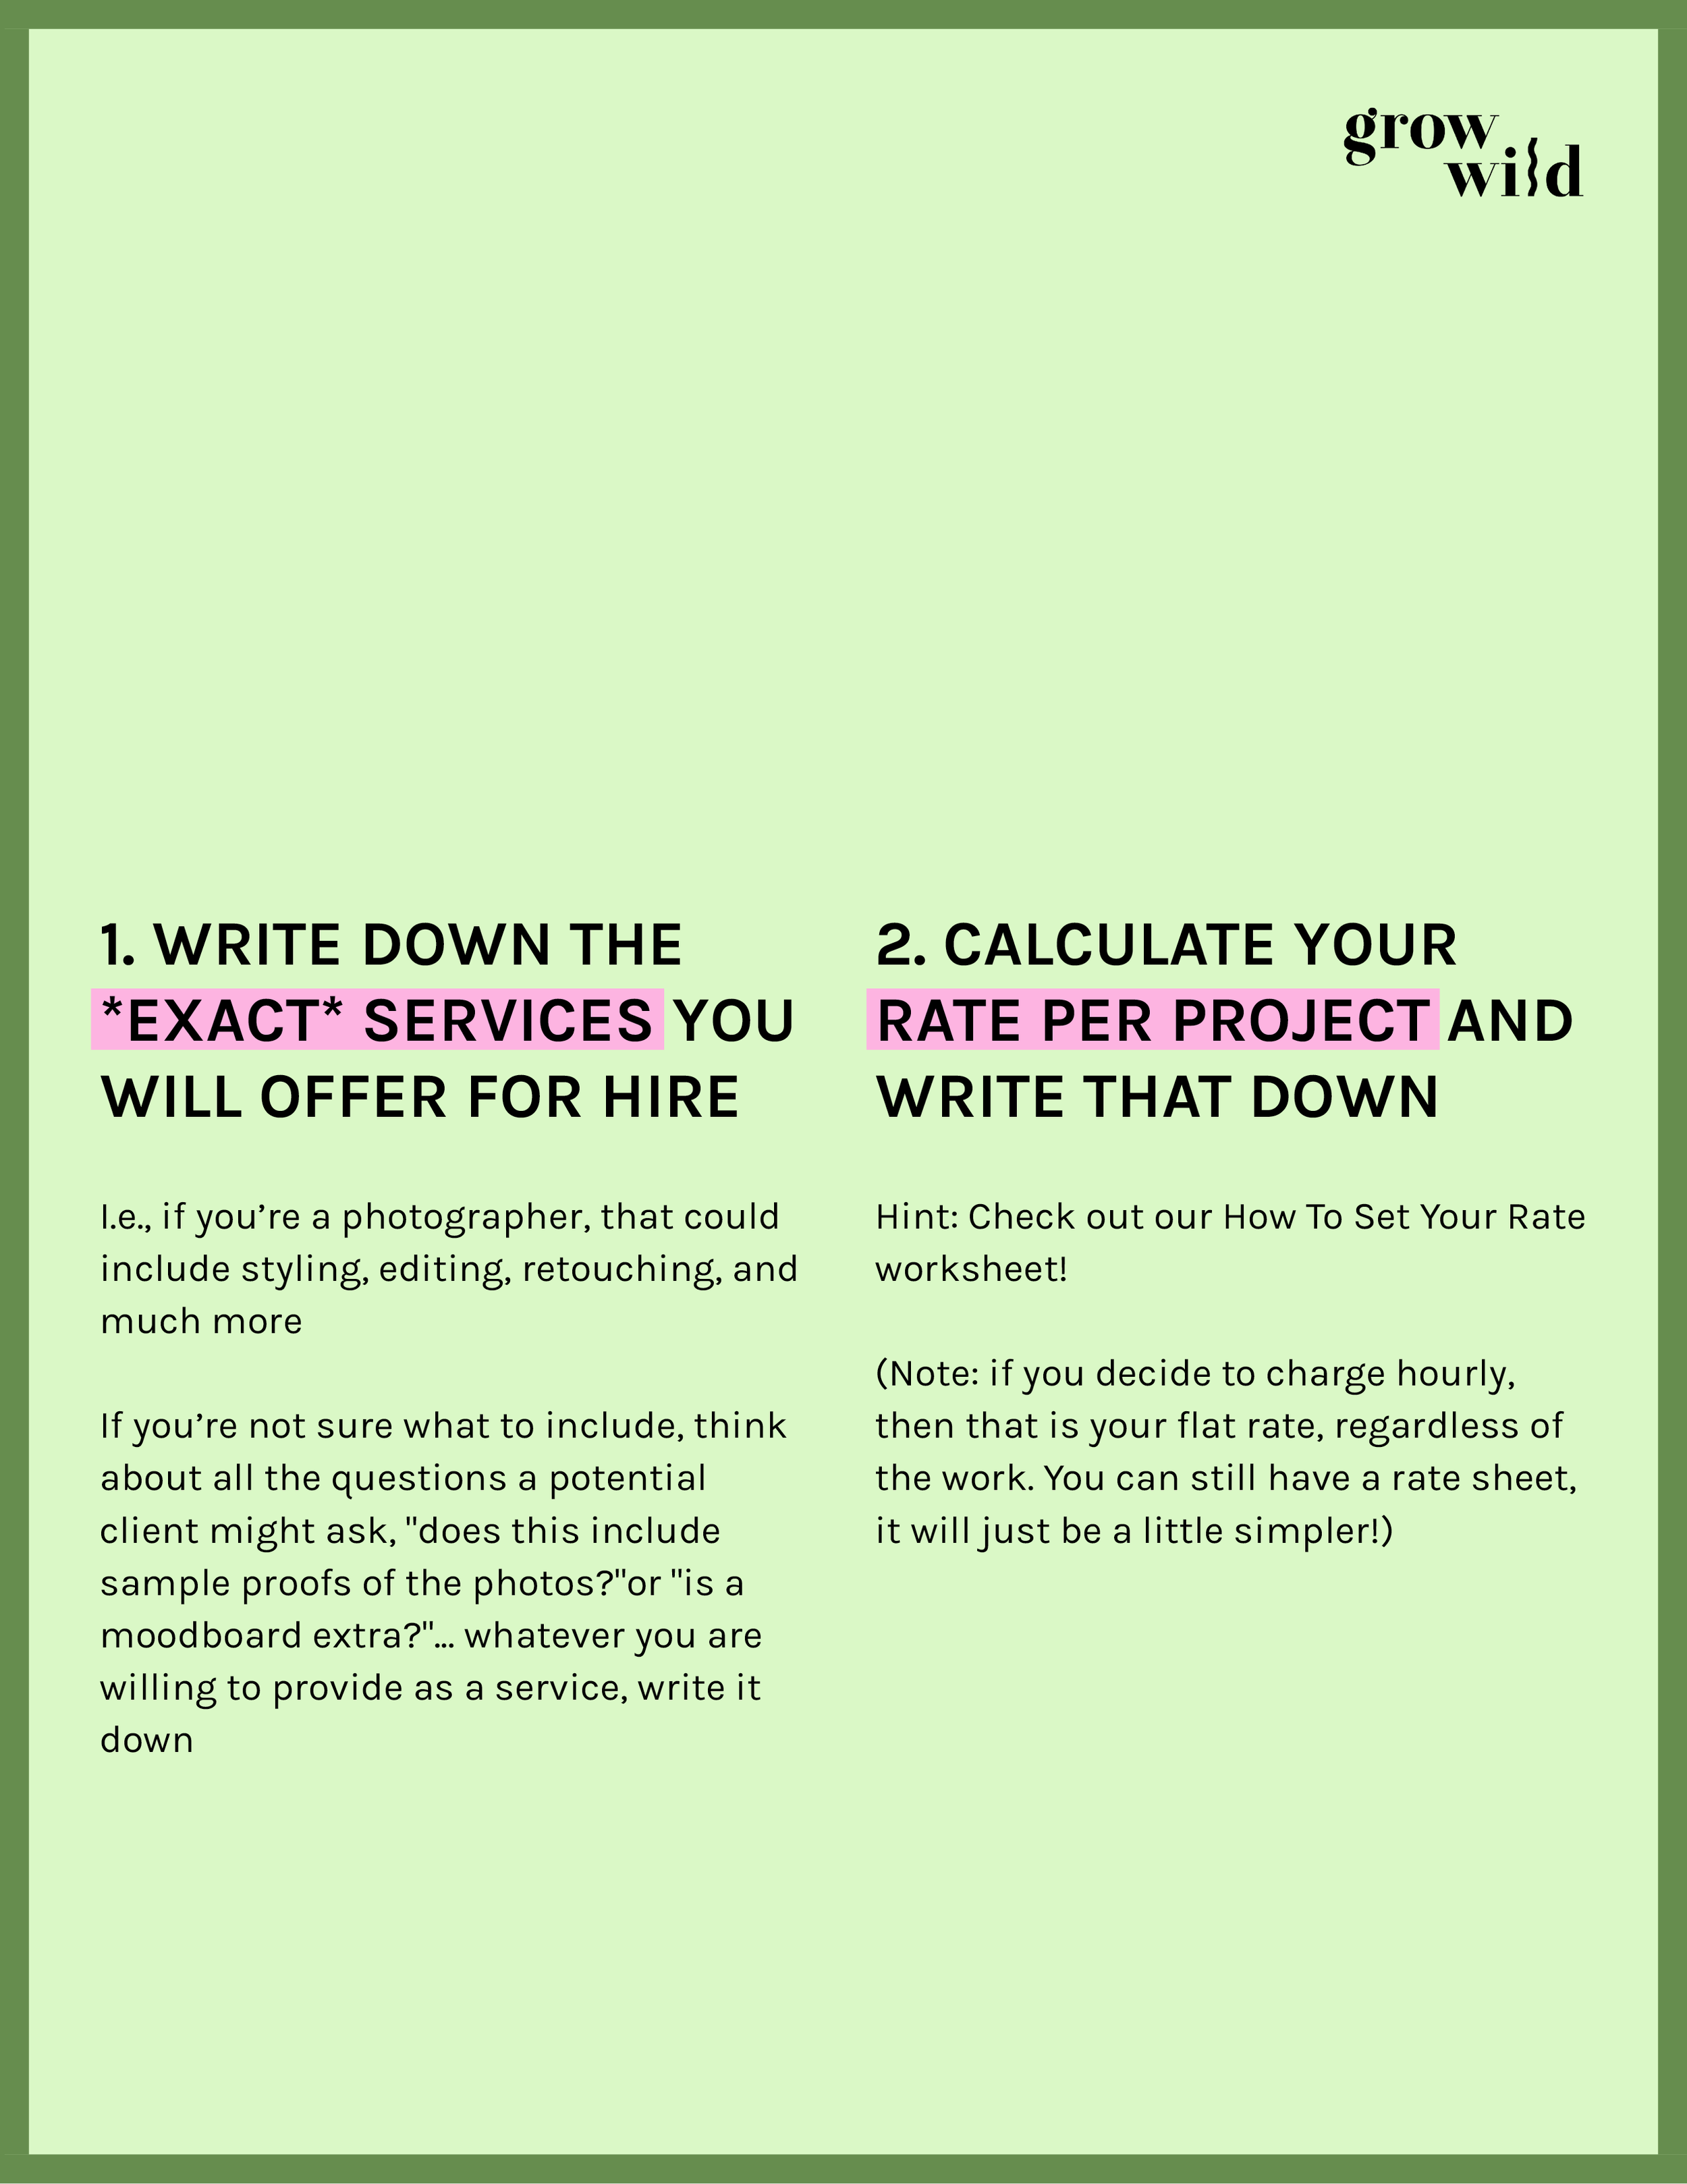 Grow Wild_Worksheet_How to create a rate sheet_0819192.png